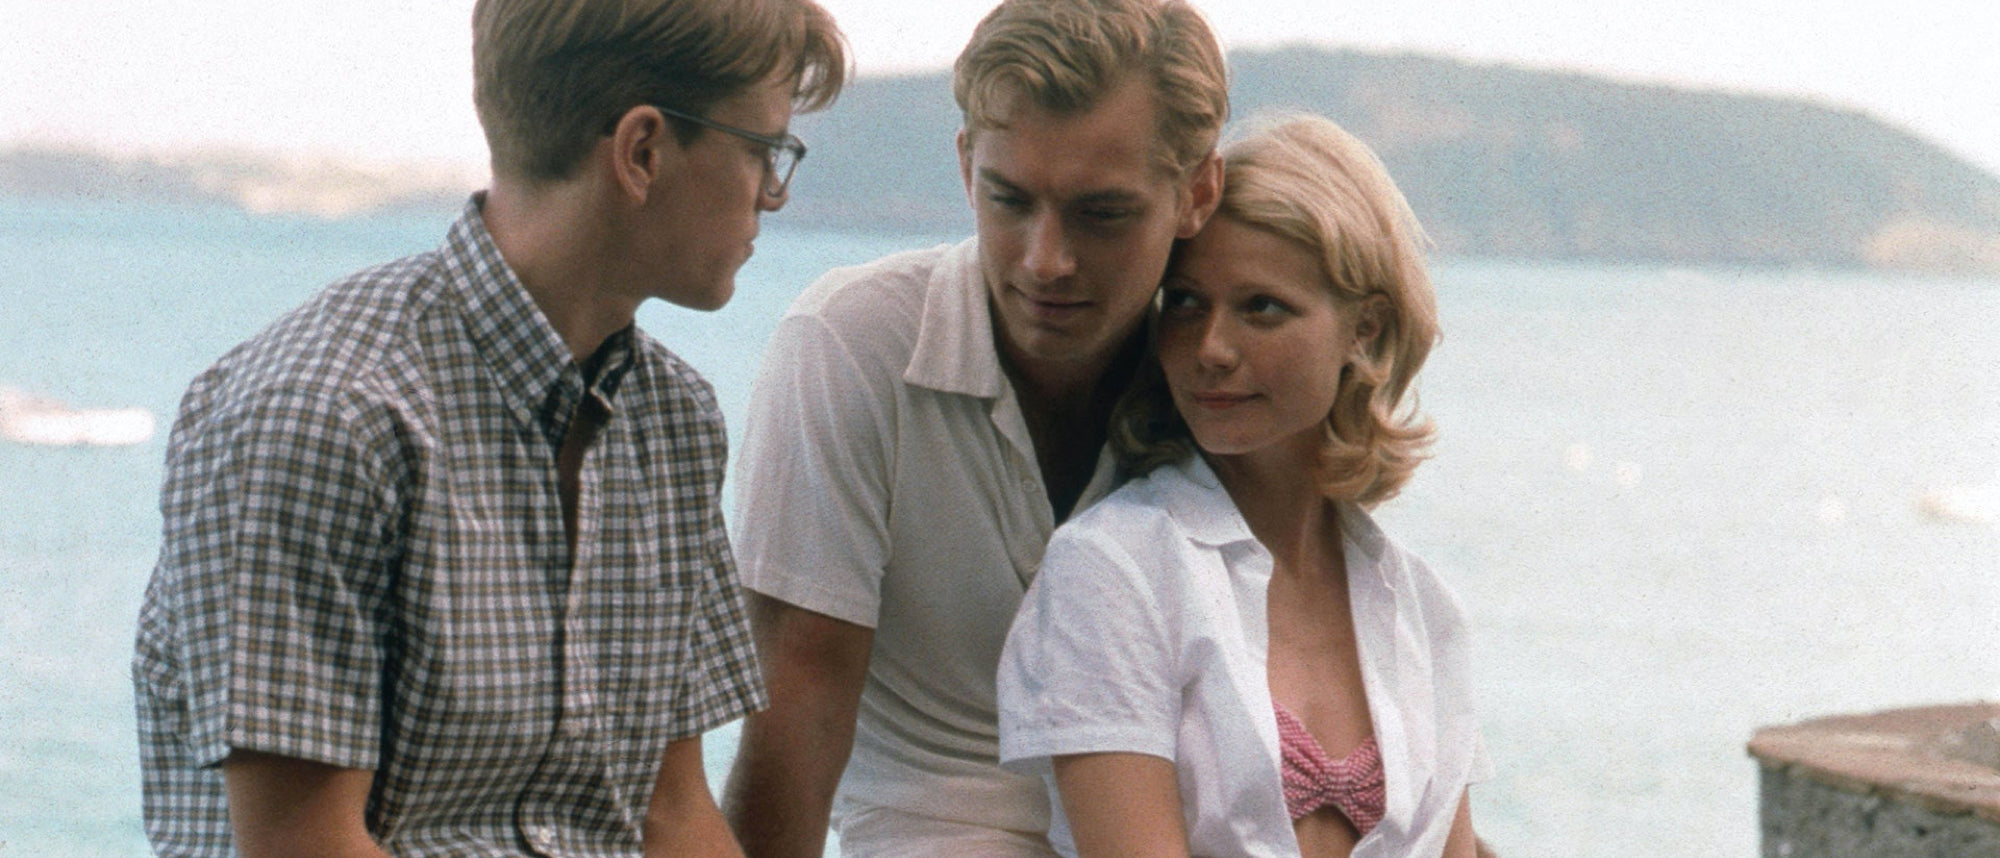 20 Years Later — Still Sartorially inspired by The Talented Mr Ripley